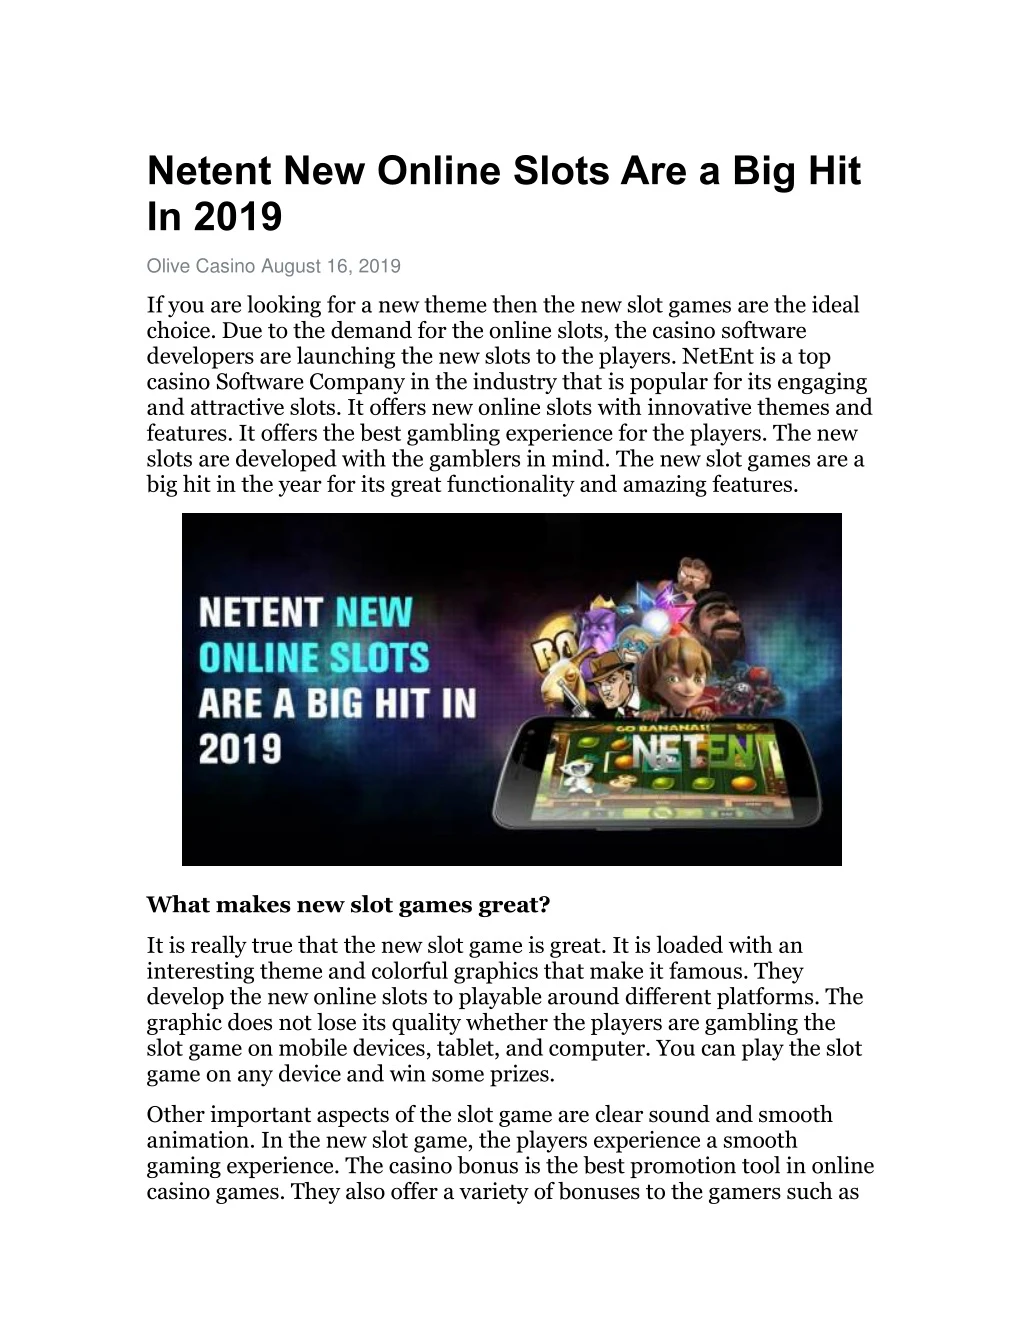 netent new online slots are a big hit in 2019